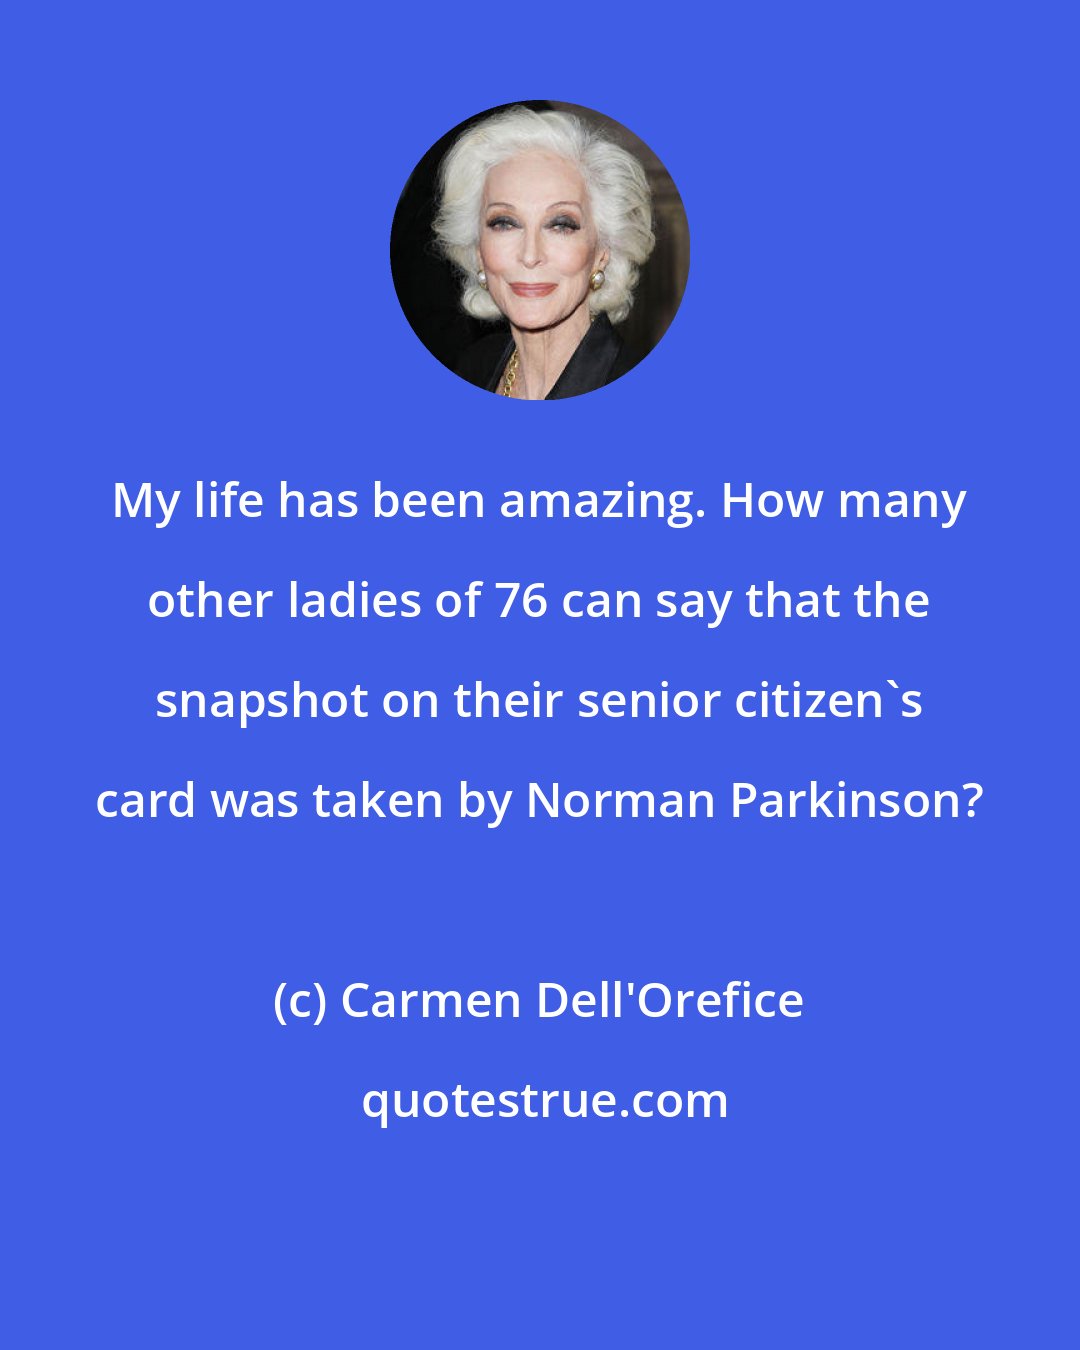 Carmen Dell'Orefice: My life has been amazing. How many other ladies of 76 can say that the snapshot on their senior citizen's card was taken by Norman Parkinson?